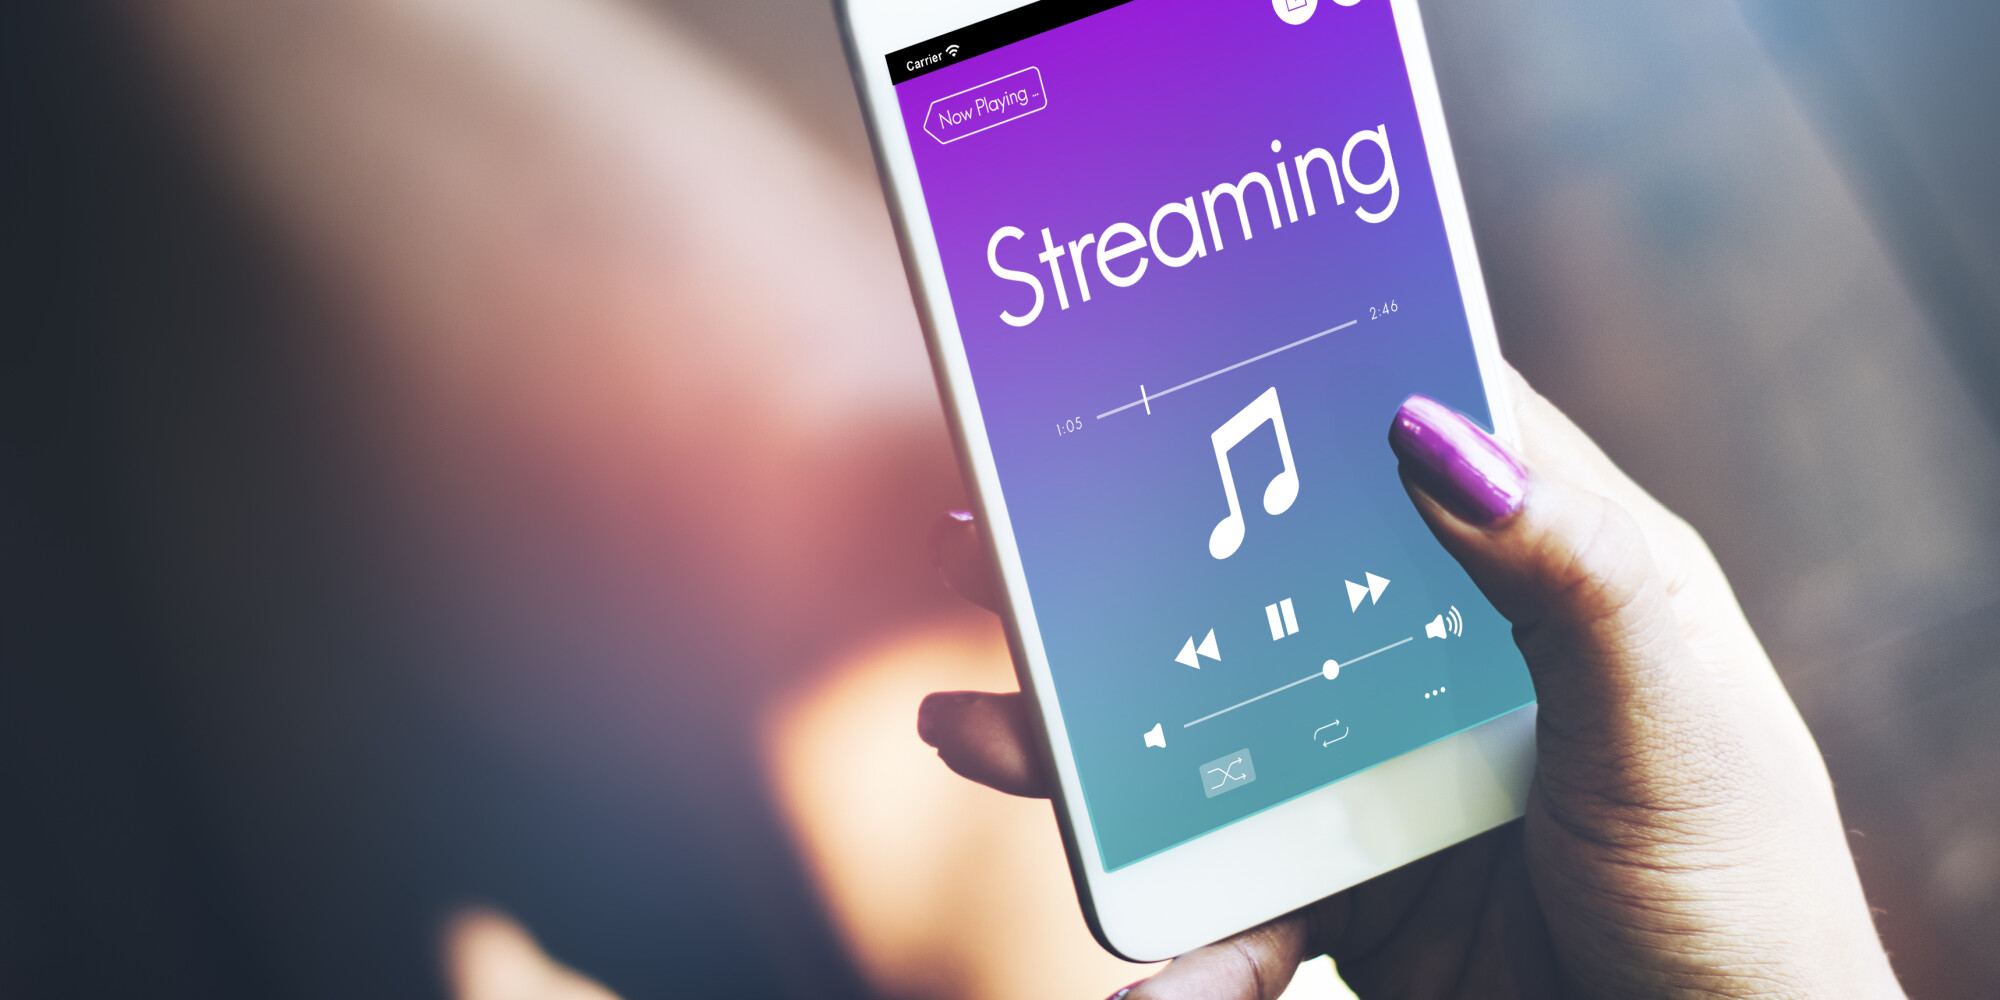 Hand holding a smart phone displaying the word “Streaming” above a musical note